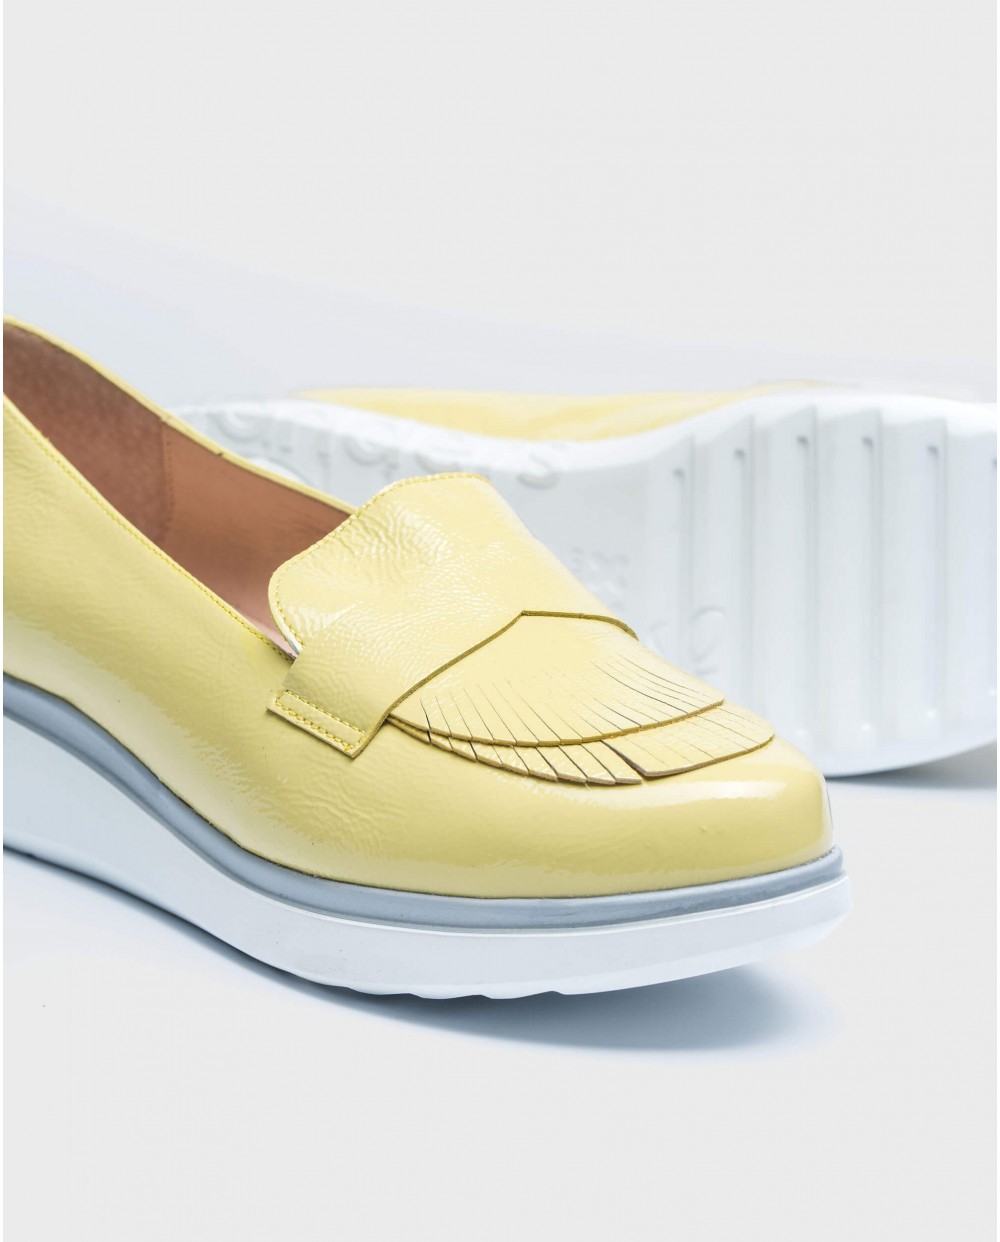 Patent leather moccasins with fringe detail